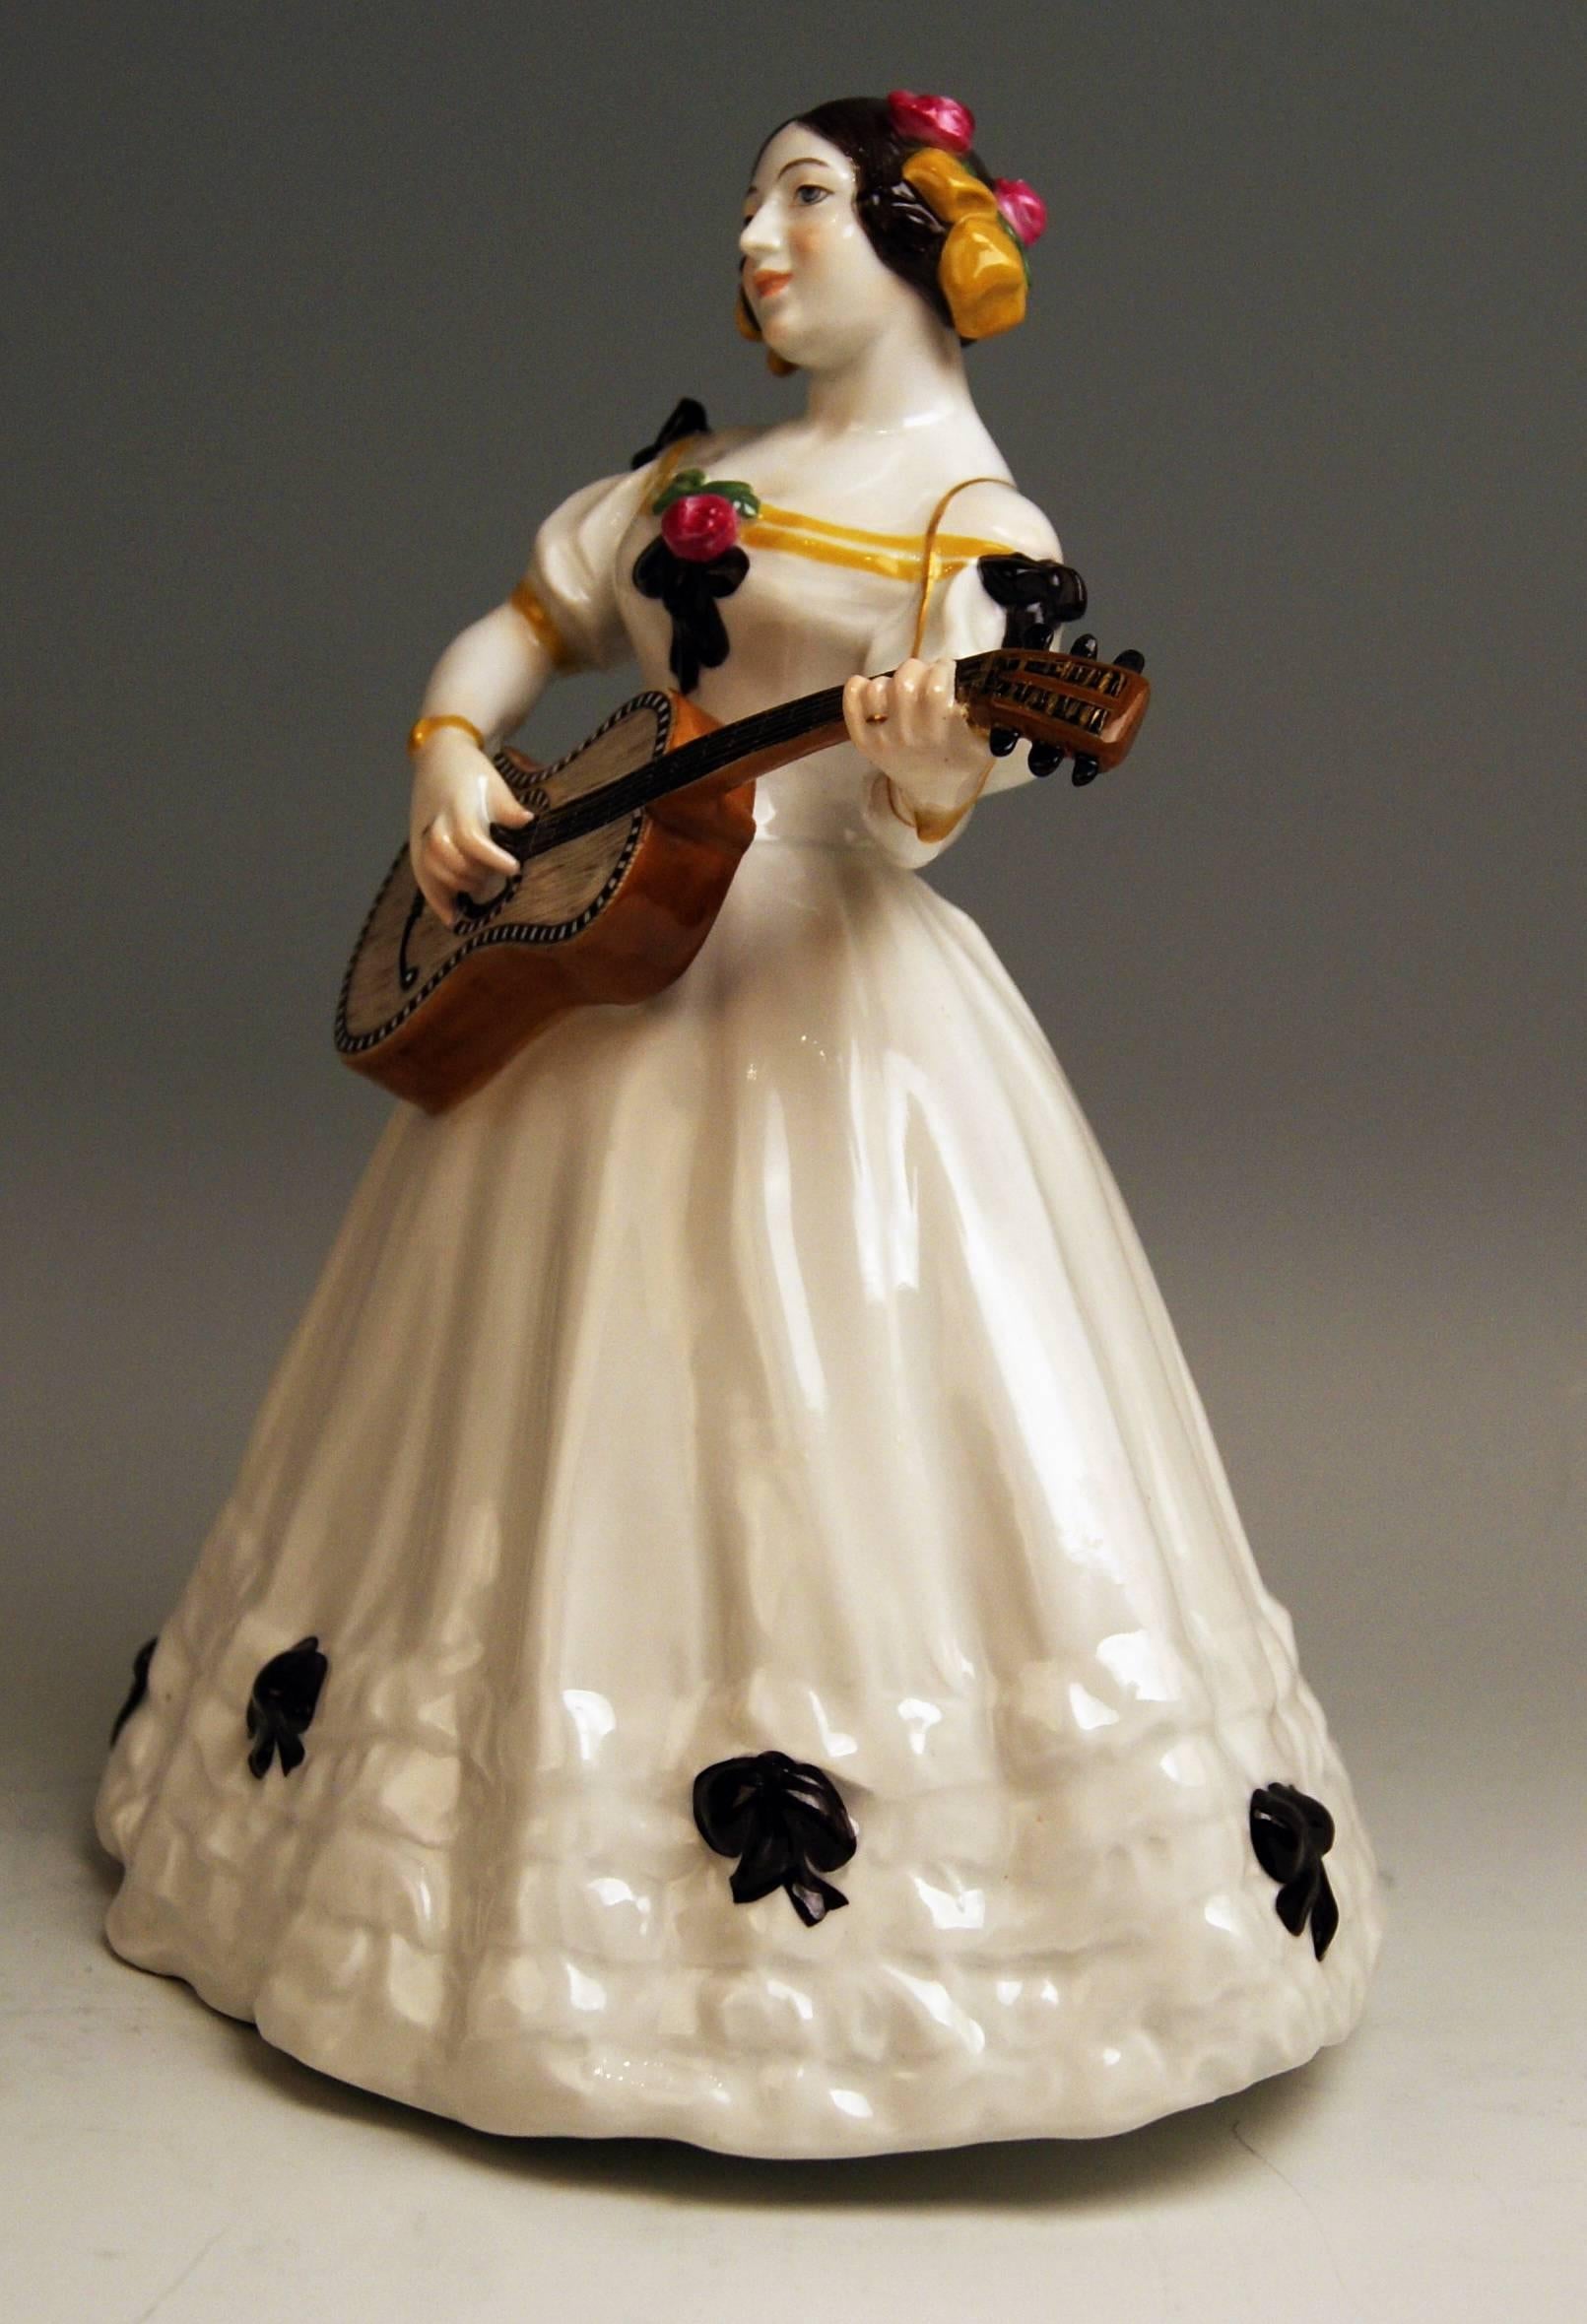 Meissen rarest figurine: female lute player (= Kate Hyan)

Measures / dimensions:
height: 10.23 inches 
width: 8.26 inches
depth: 6.10 inches 

Manufactory: Meissen
Hallmarked: Blue Meissen Sword Mark (glazed bottom)
model number V 143 /